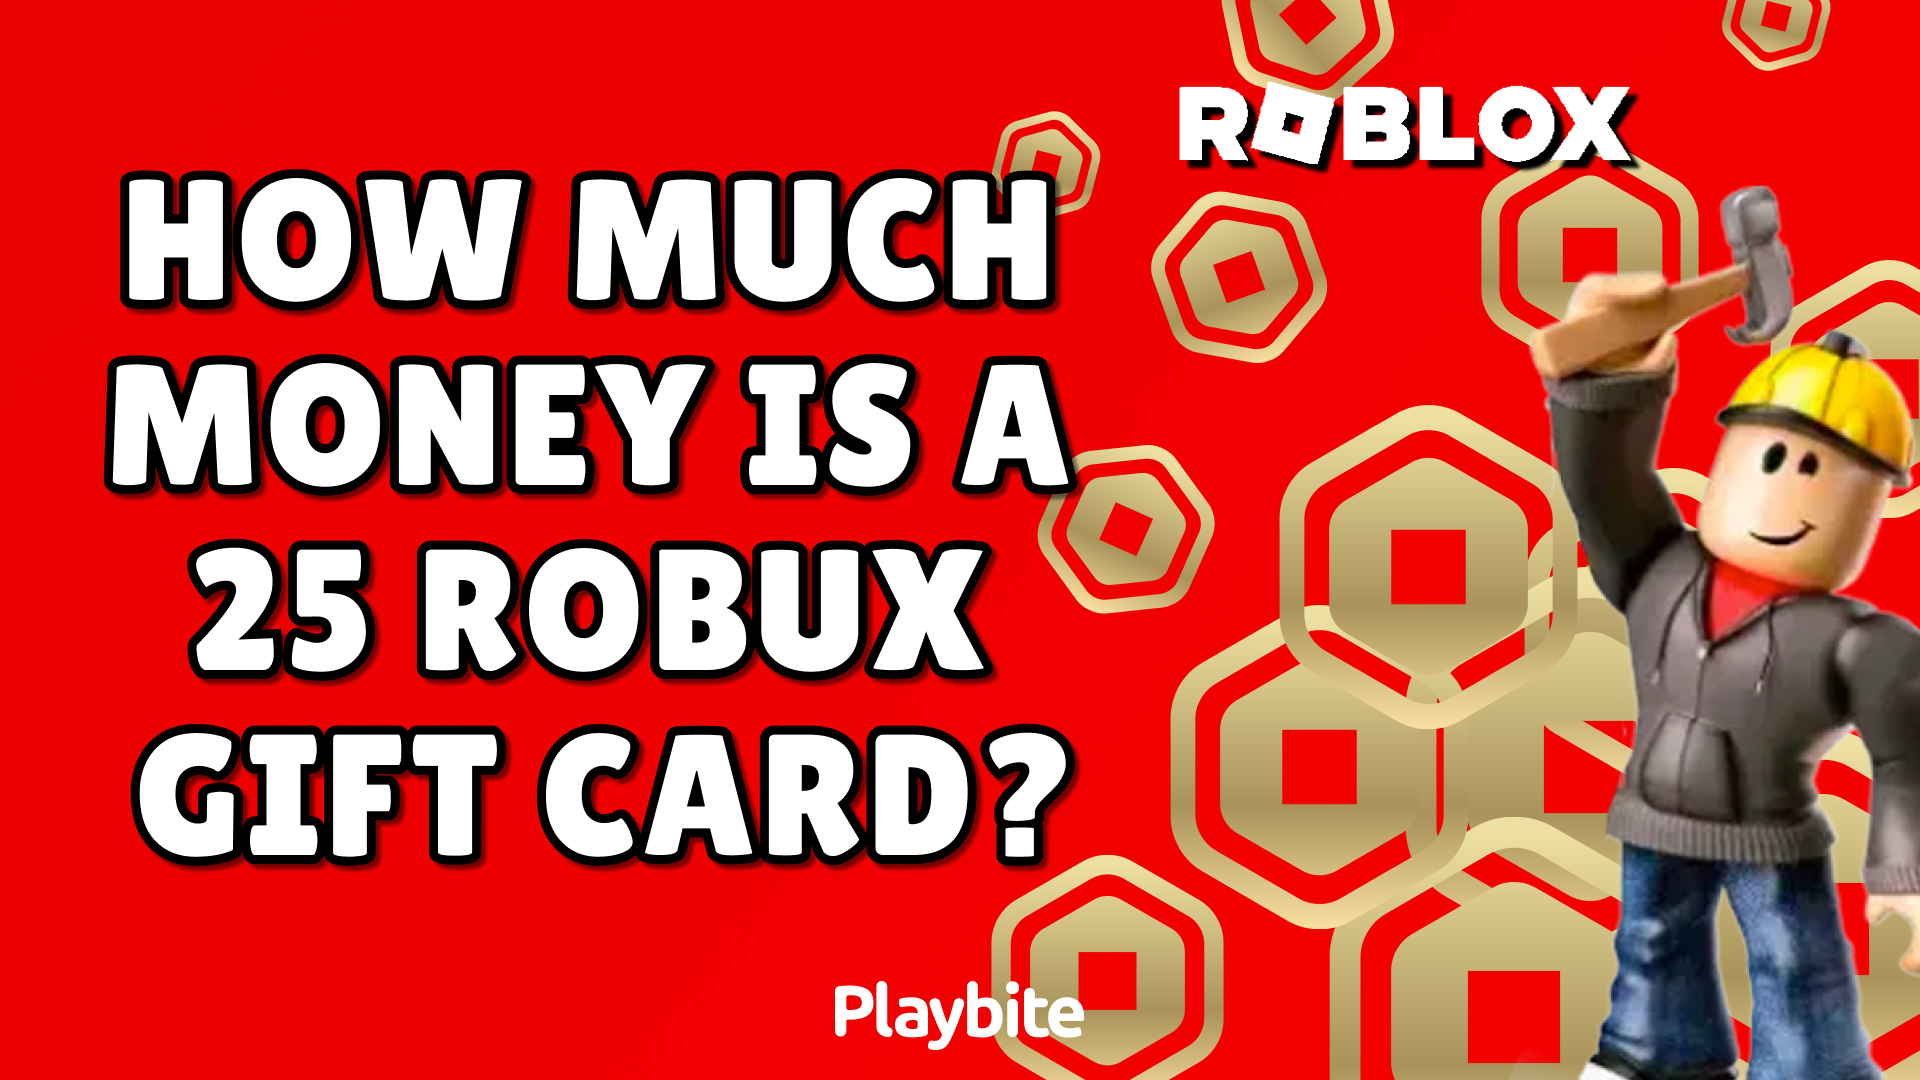 How Much Money Is a 25 Robux Gift Card?